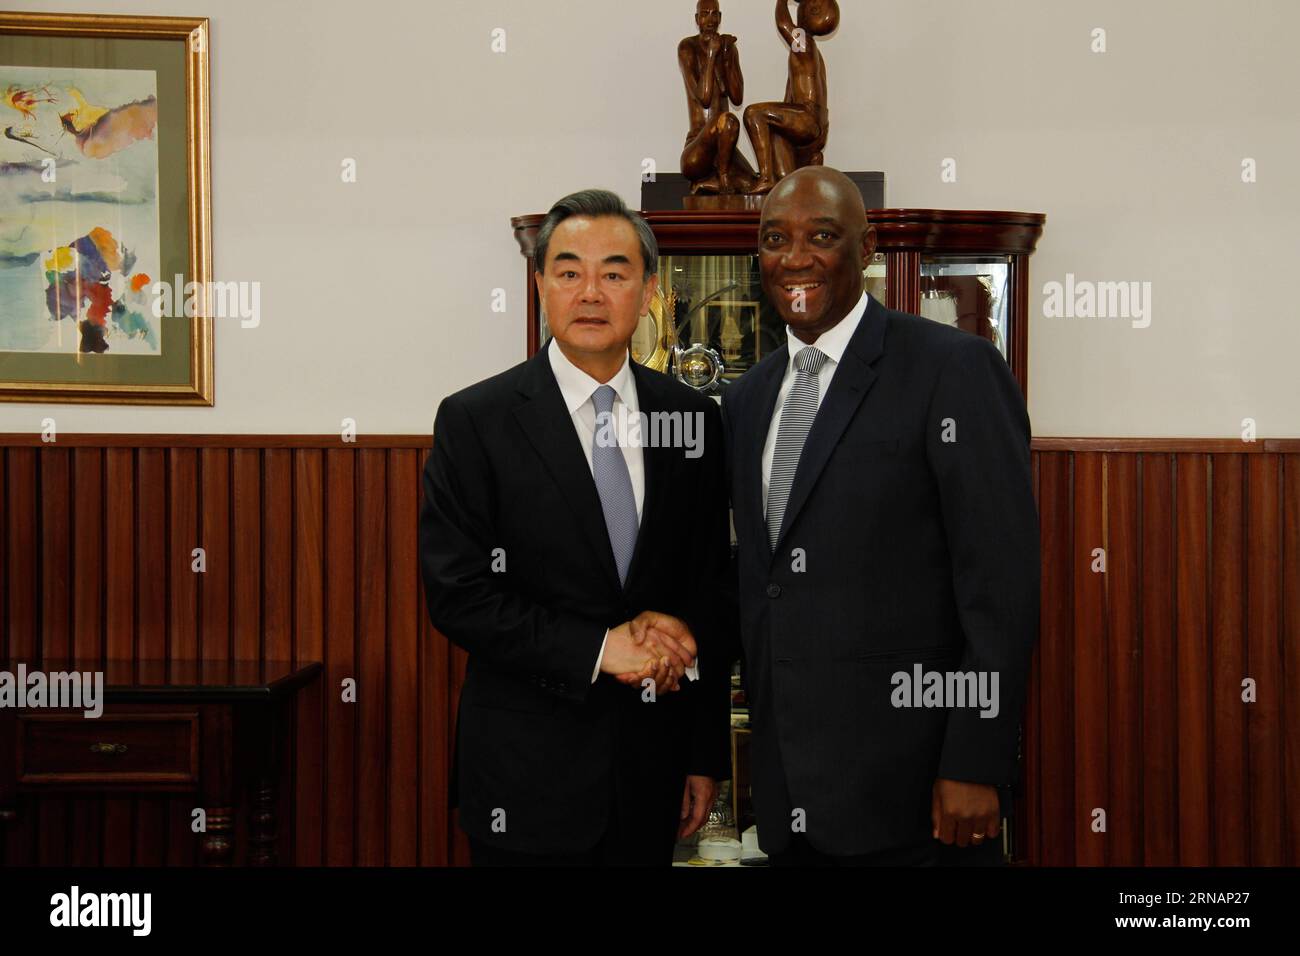 (160203) -- MAPUTO, Feb. 3, 2016 -- Chinese Foreign Minister Wang Yi(L) shakes hands with Mozambican Minister of Foreign Affairs and Cooperation Oldemiro Baloi during their meeting in Maputo, Mozambique, Feb. 2, 2016. ) MOZAMBIQUE-MAPUTO-CHINA-FM-MEETING LixXiaopeng PUBLICATIONxNOTxINxCHN   Maputo Feb 3 2016 Chinese Foreign Ministers Wang Yi l Shakes Hands With Mozambican Ministers of Foreign Affairs and Cooperation Olde Miro Baloi during their Meeting in Maputo Mozambique Feb 2 2016 Mozambique Maputo China FM Meeting LixXiaopeng PUBLICATIONxNOTxINxCHN Stock Photo